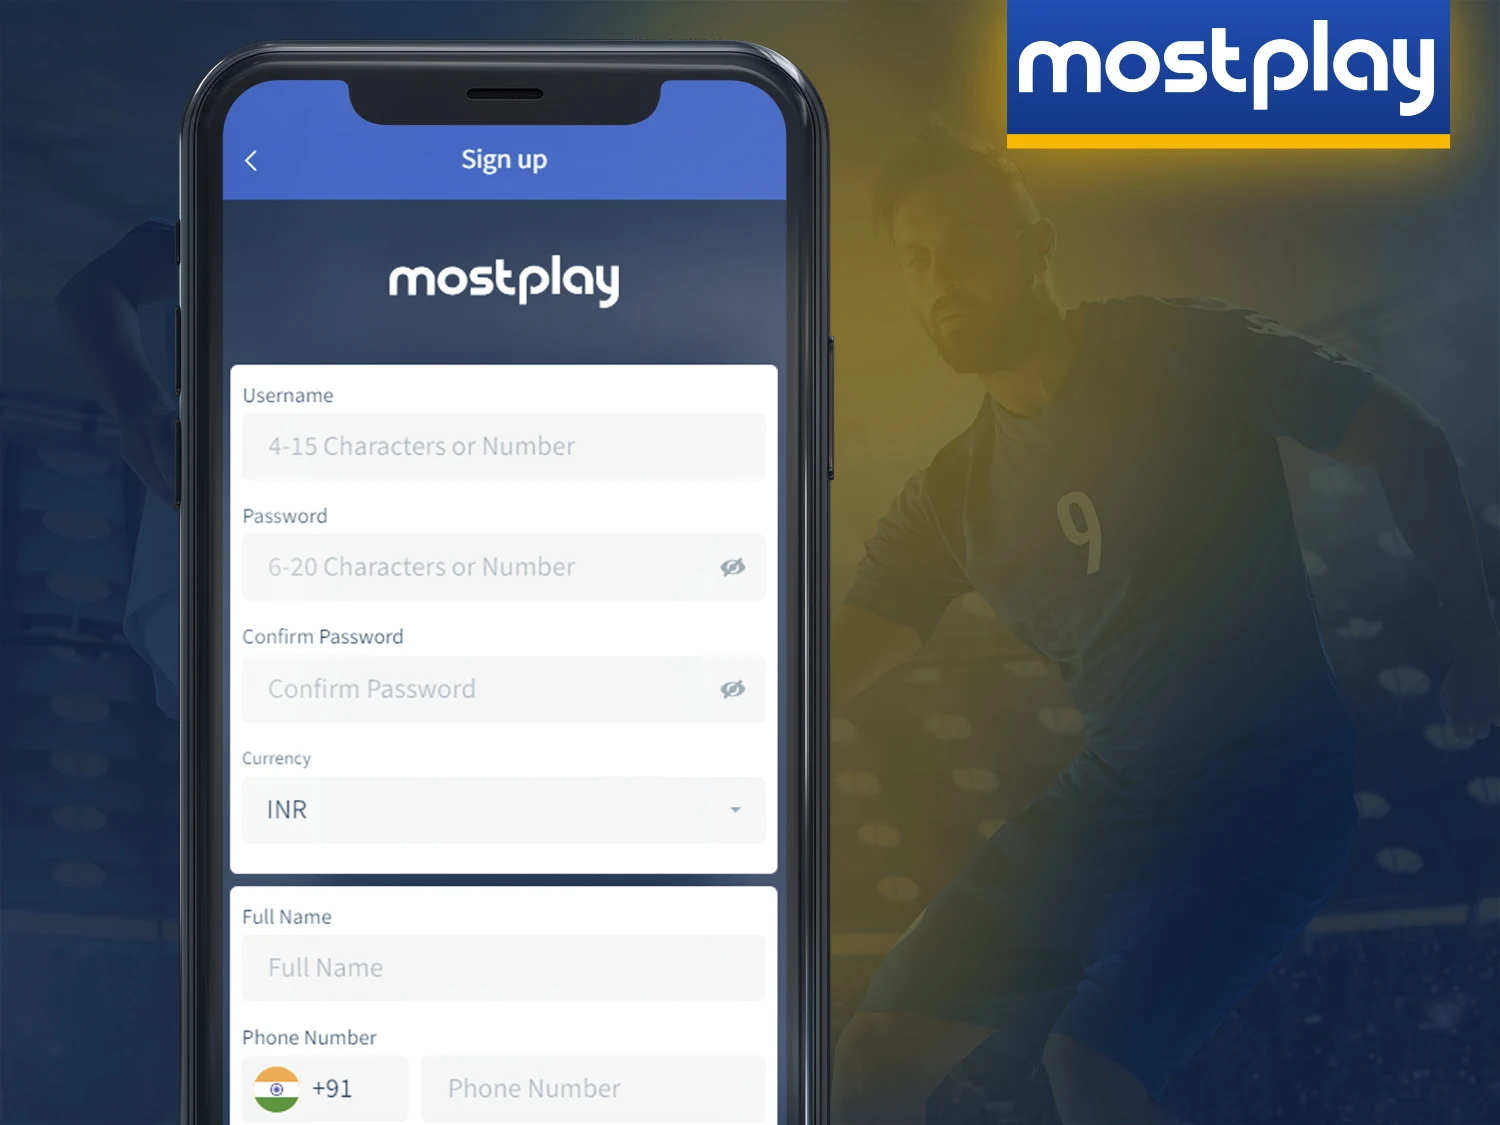 Make your own account on the Mostplay registration page.